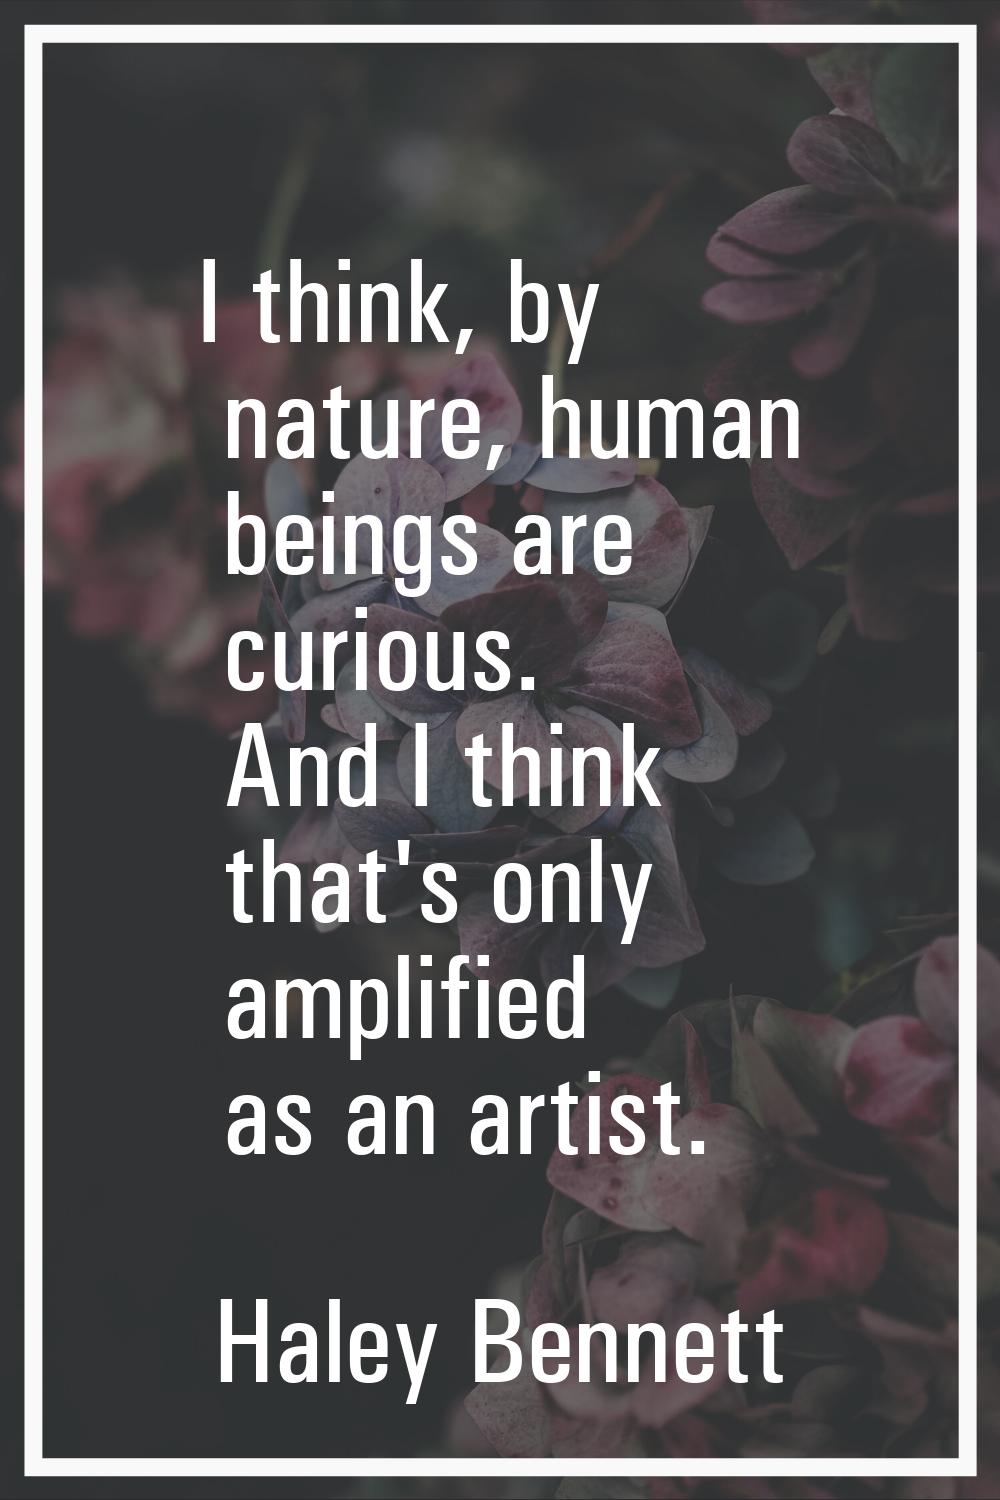 I think, by nature, human beings are curious. And I think that's only amplified as an artist.